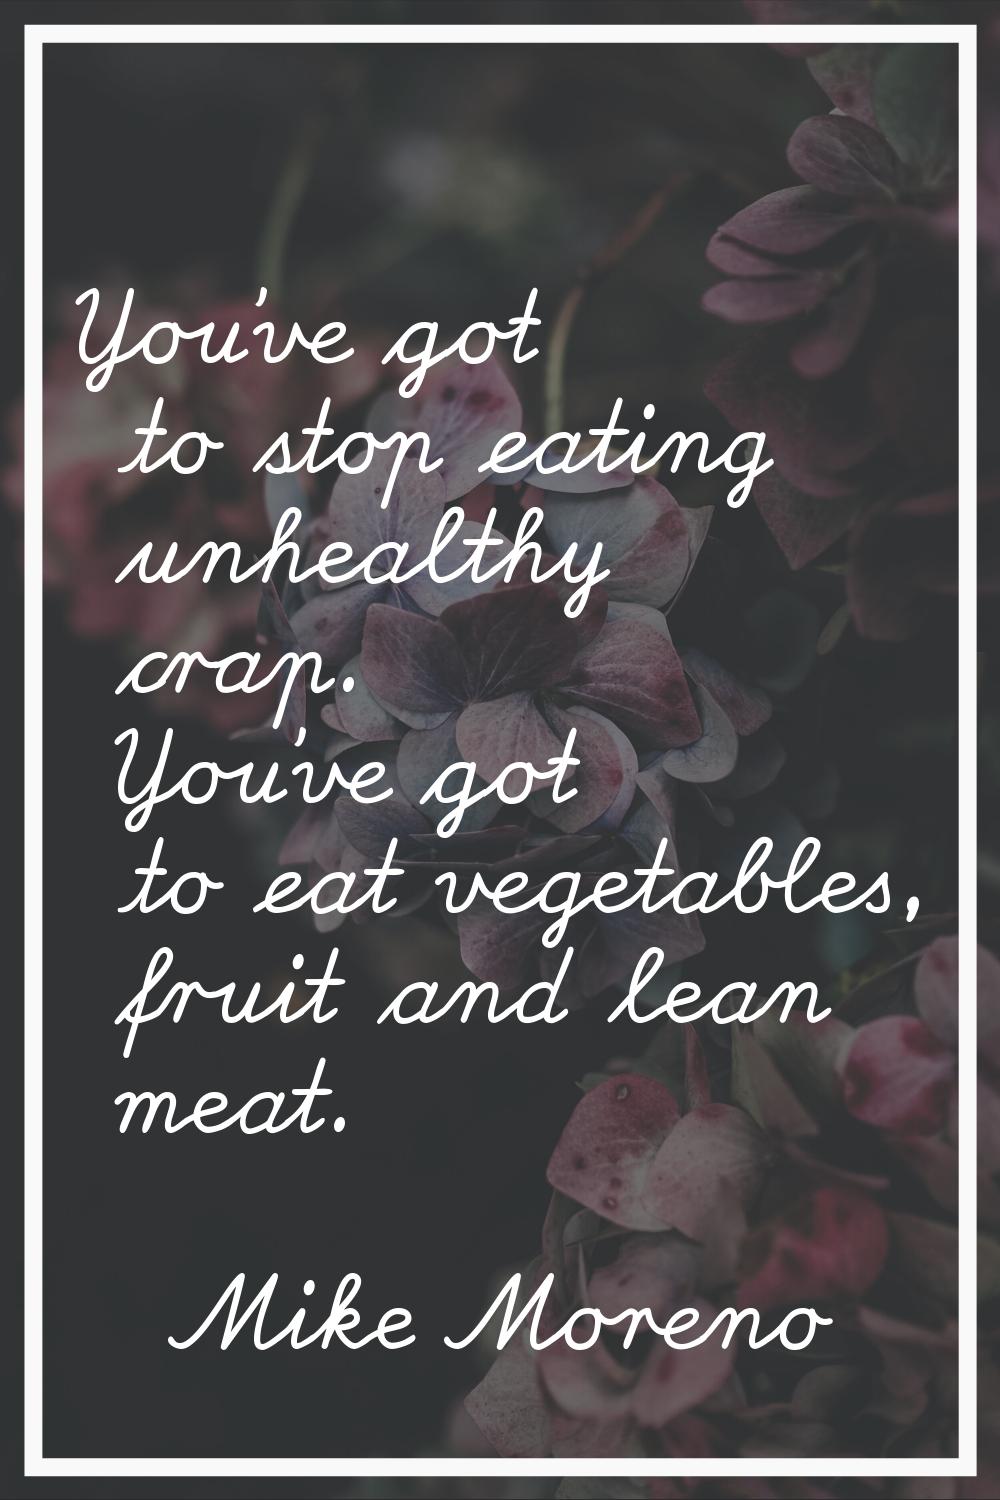 You've got to stop eating unhealthy crap. You've got to eat vegetables, fruit and lean meat.